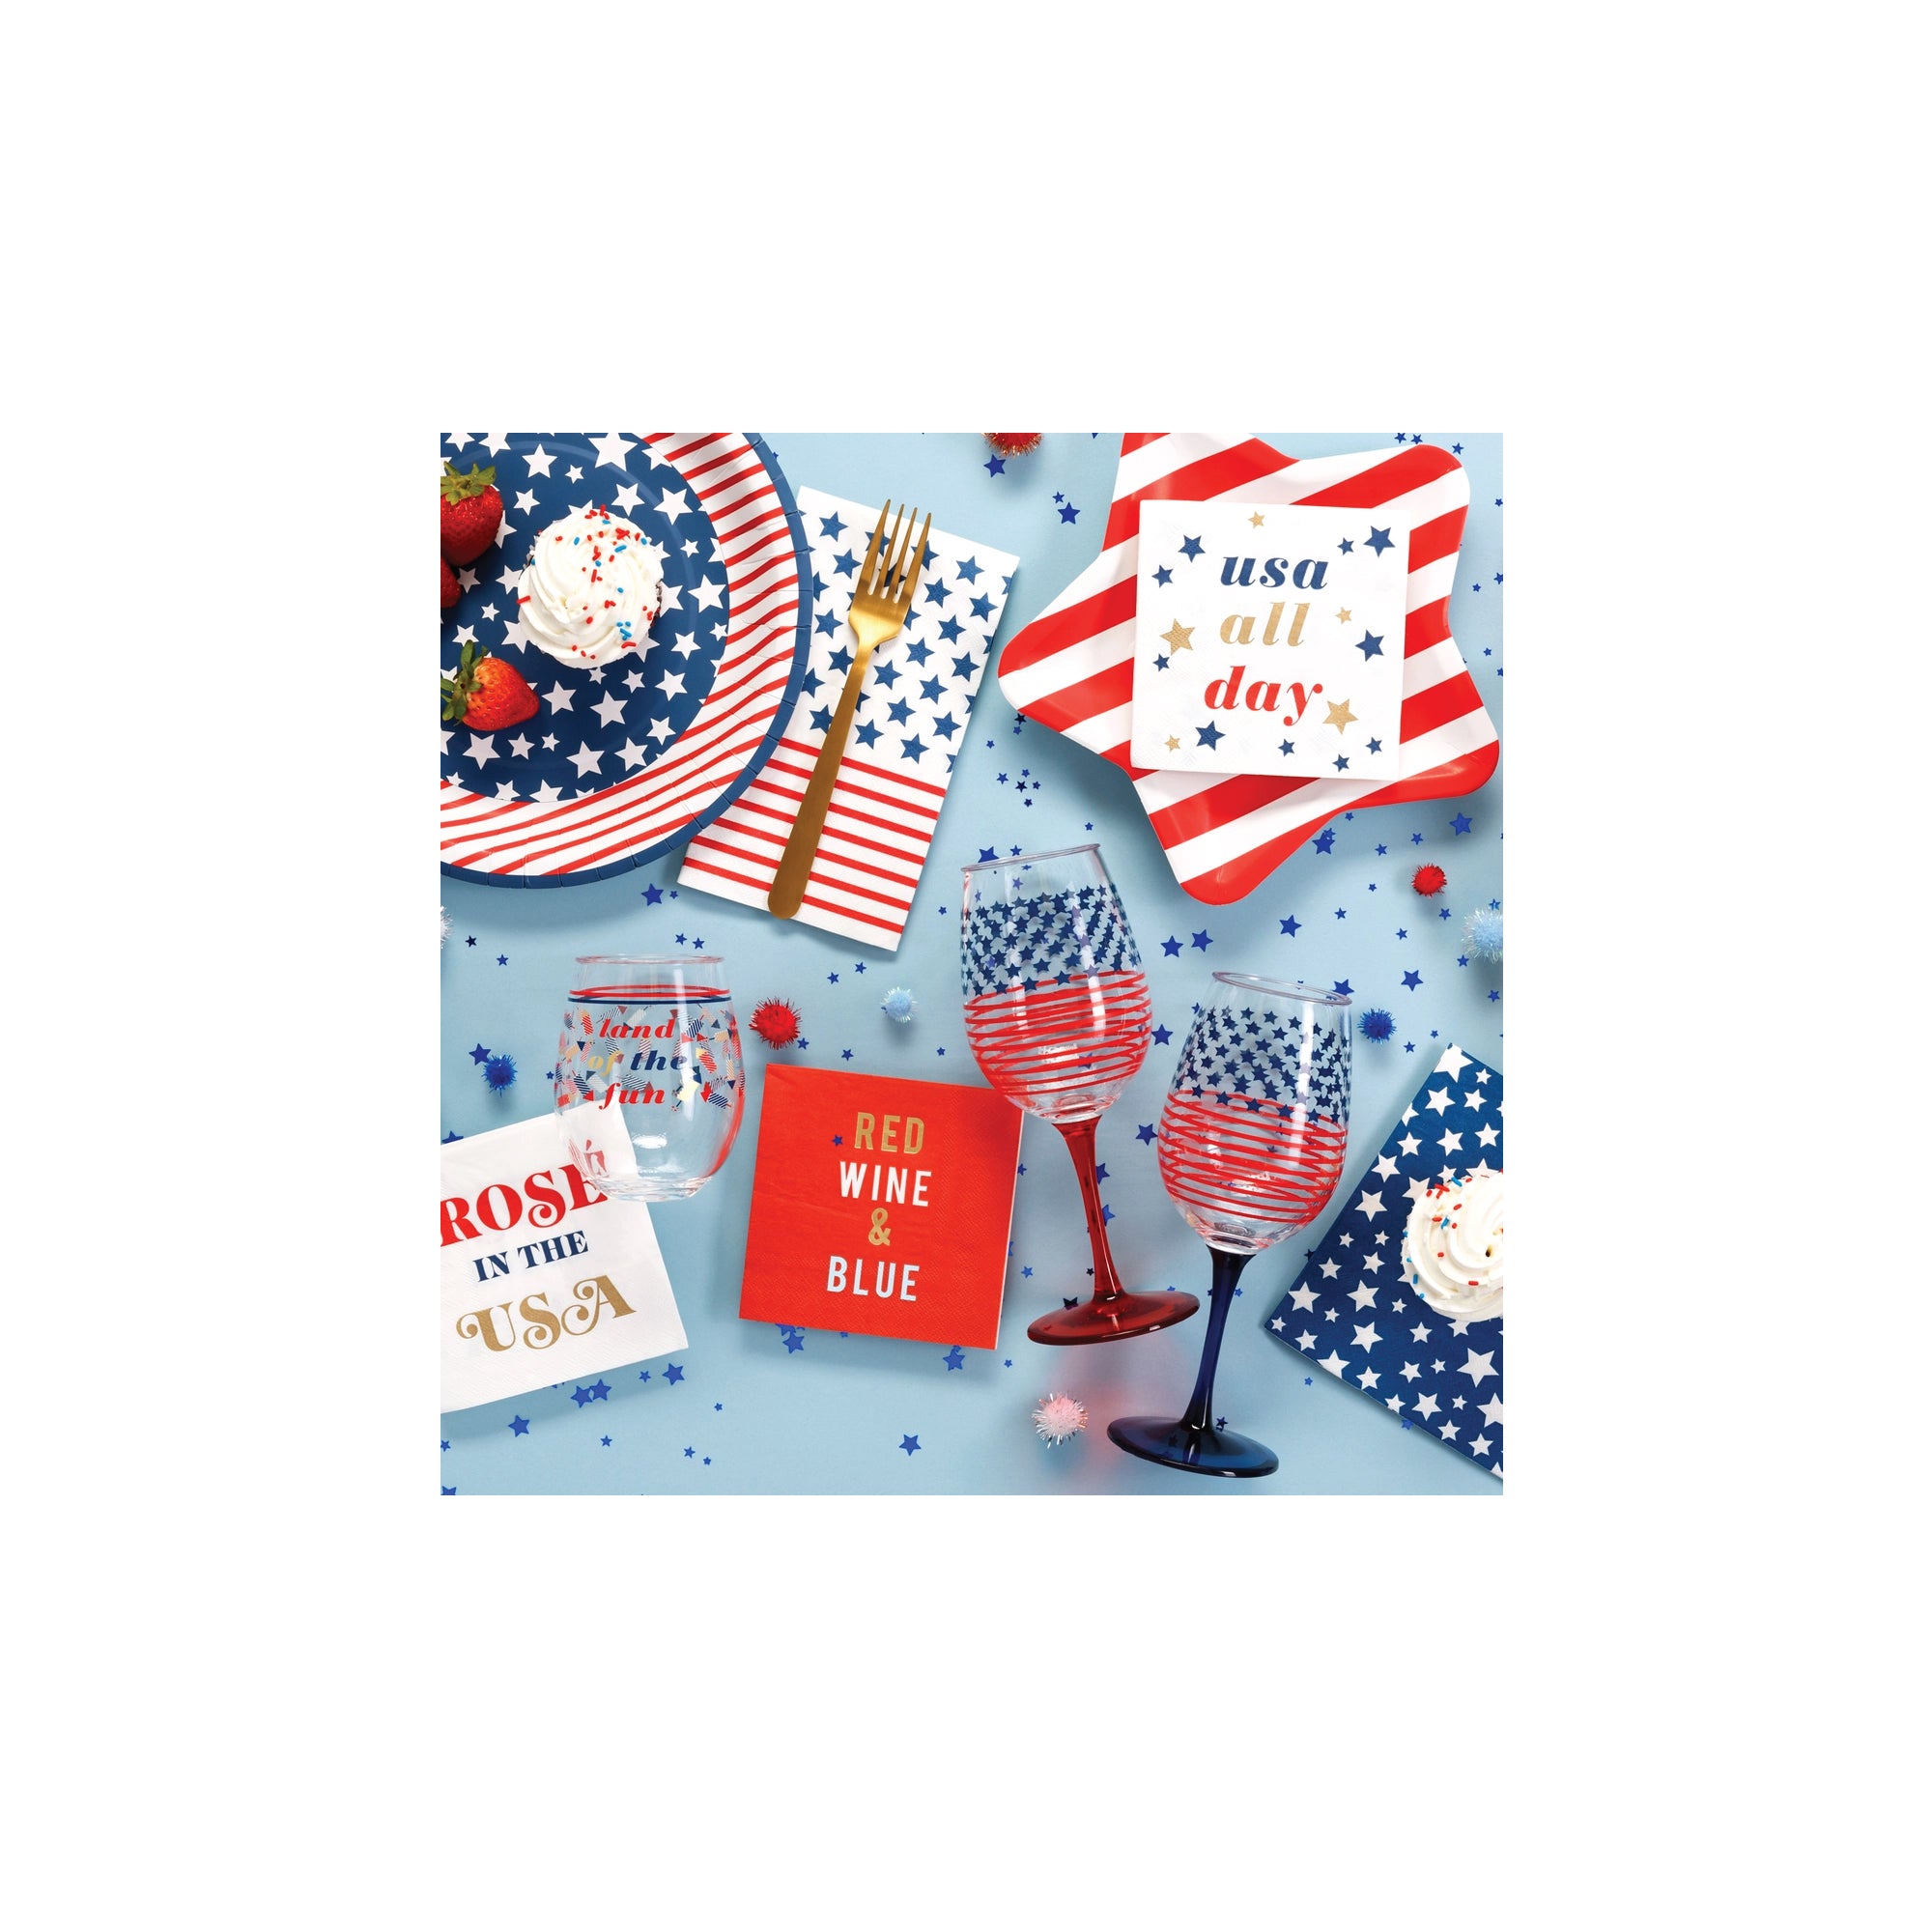 Rosé in the USA Beverage Napkins 20ct | The Party Darling